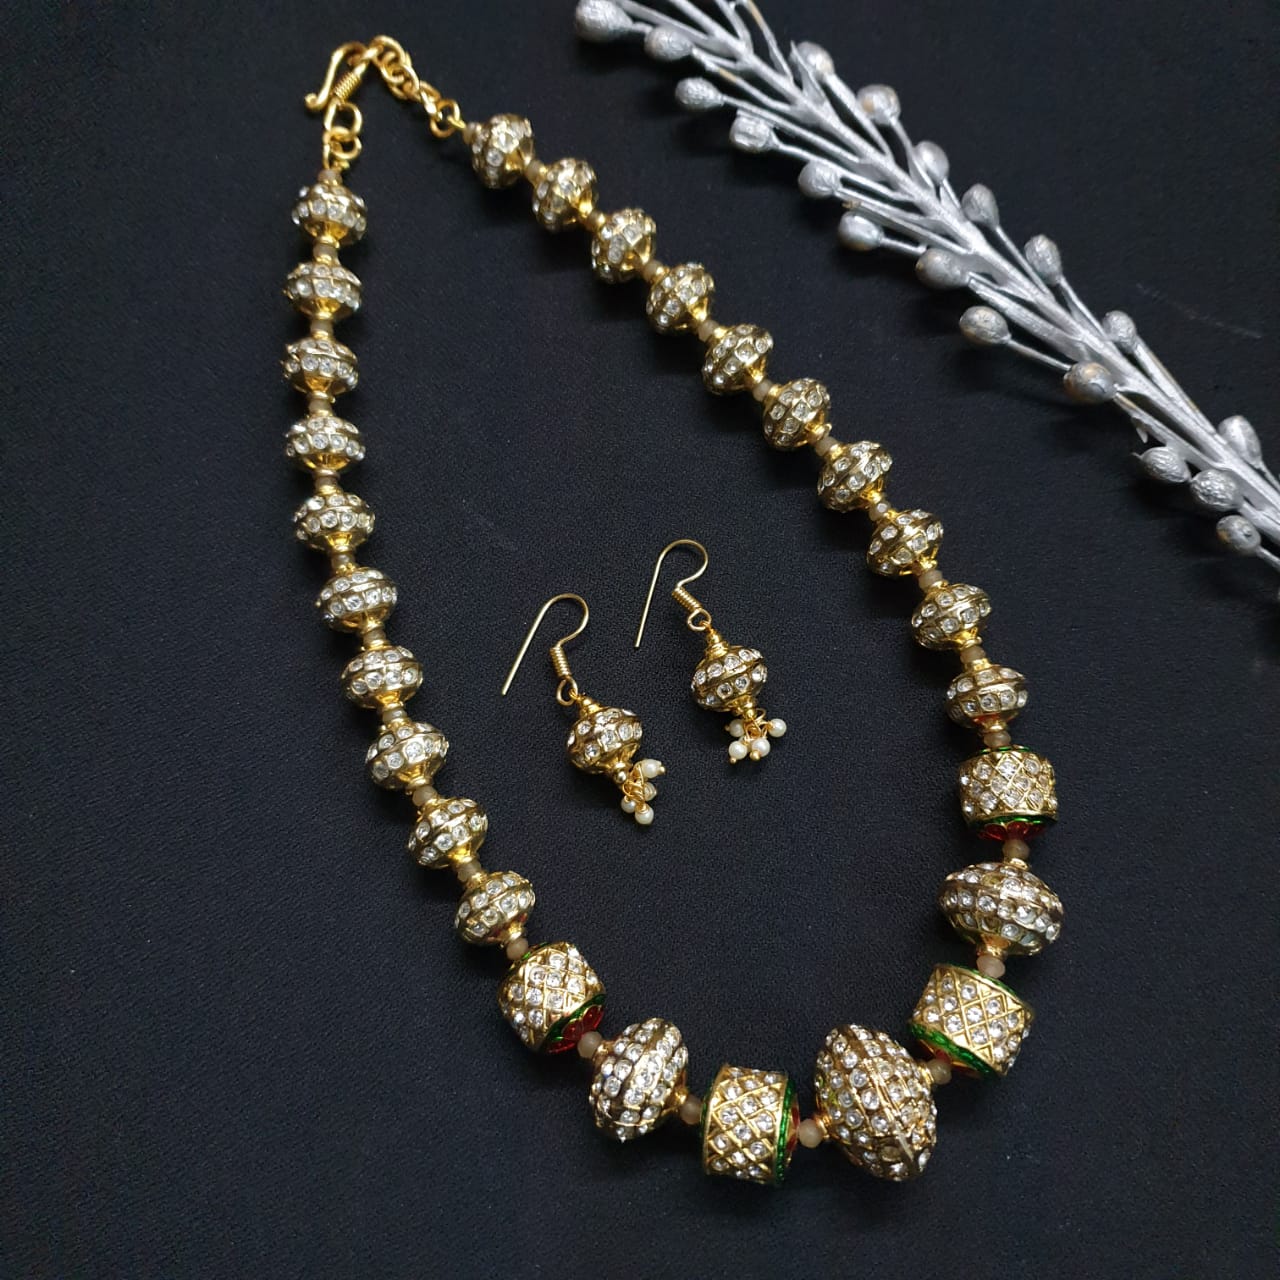 White Stone Jadau Necklace With Earrings